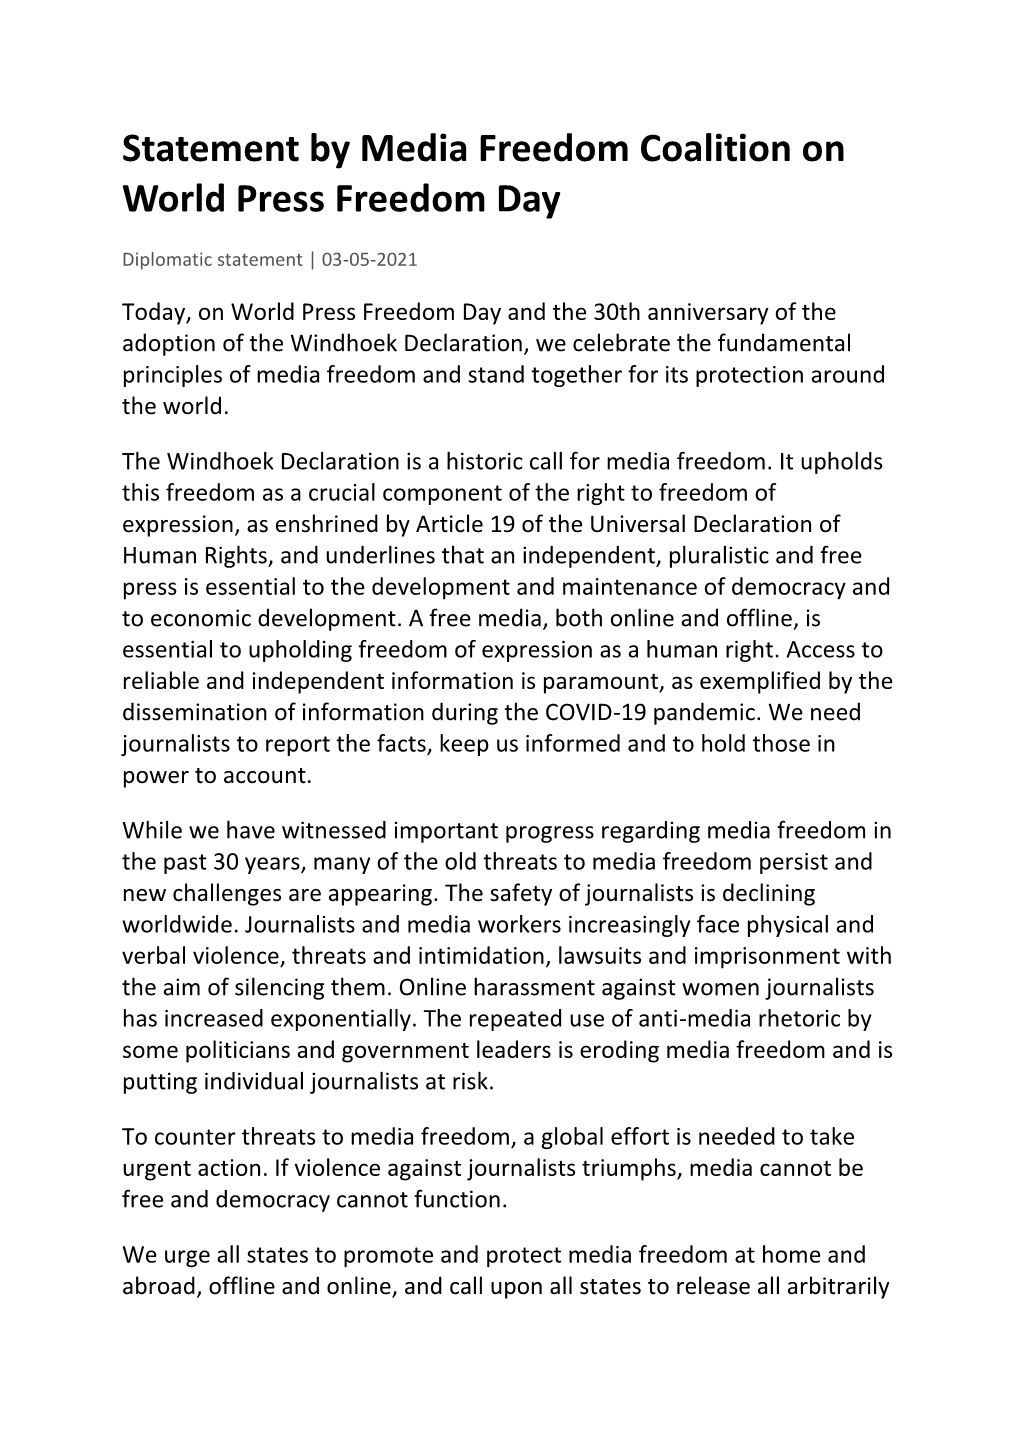 Statement by Media Freedom Coalition on World Press Freedom Day